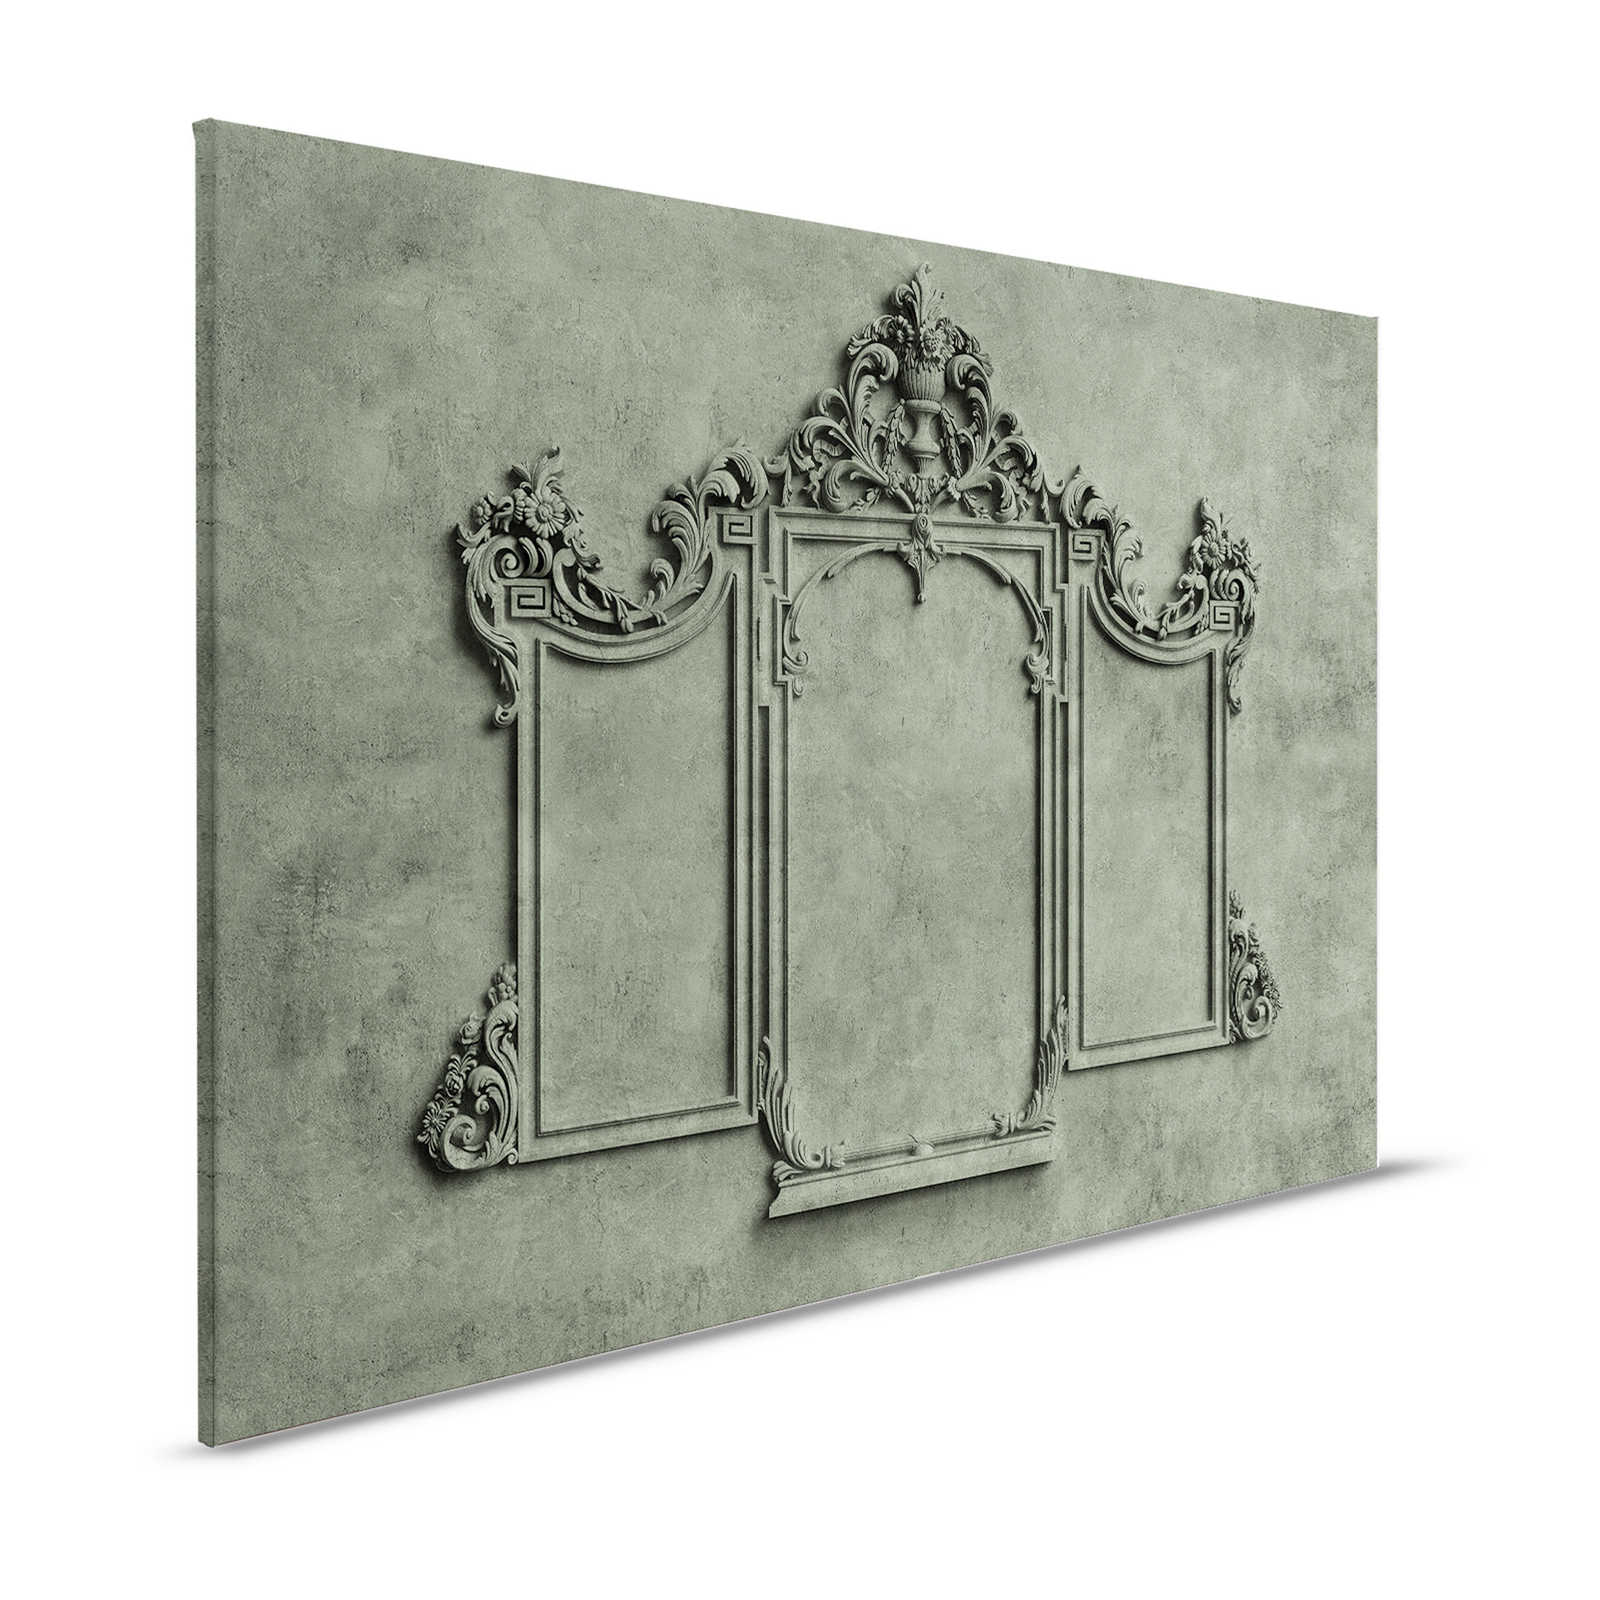 Lyon 2 - Canvas painting 3D stucco frame & plaster look in green - 1.20 m x 0.80 m
